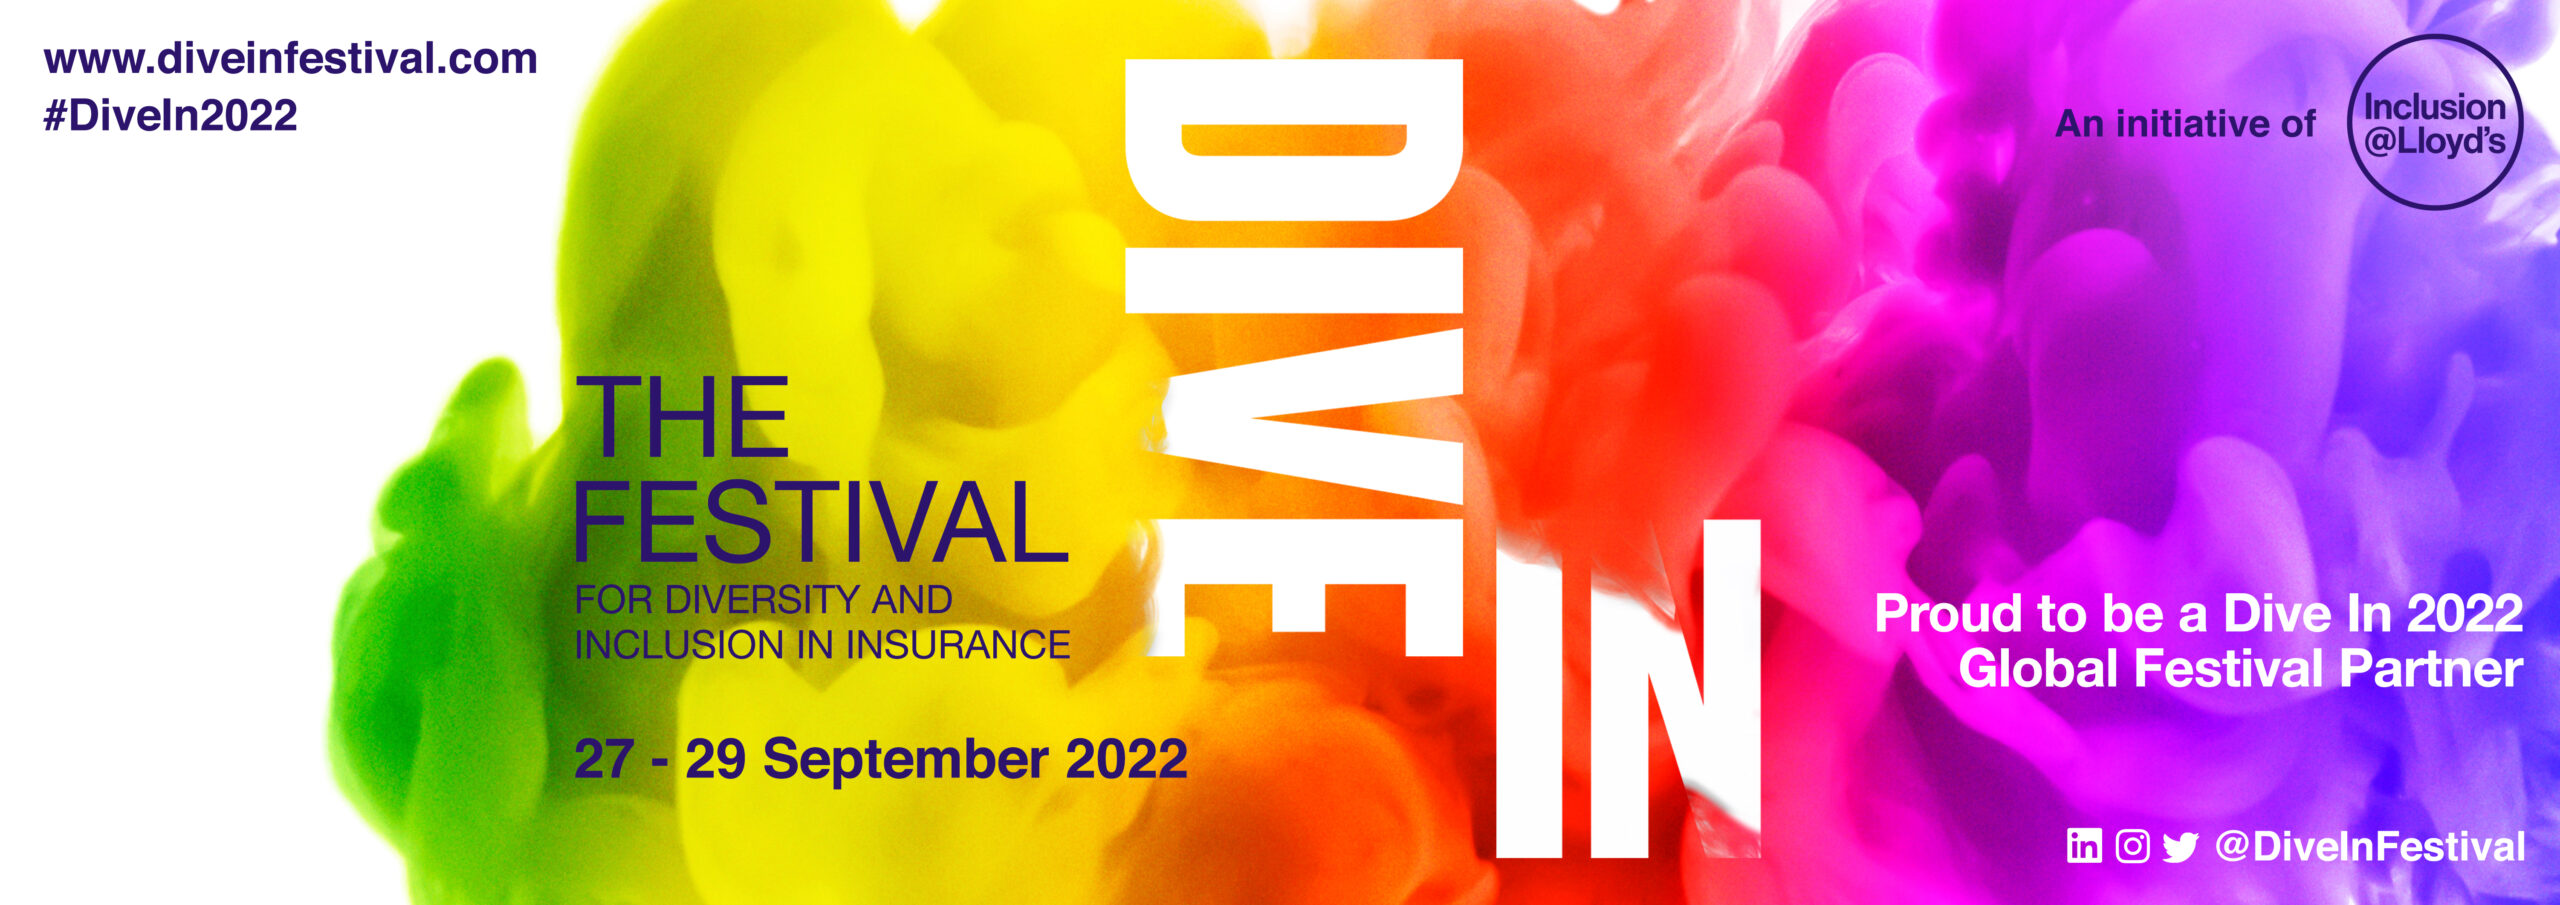 Dive In 2022 promotional banner